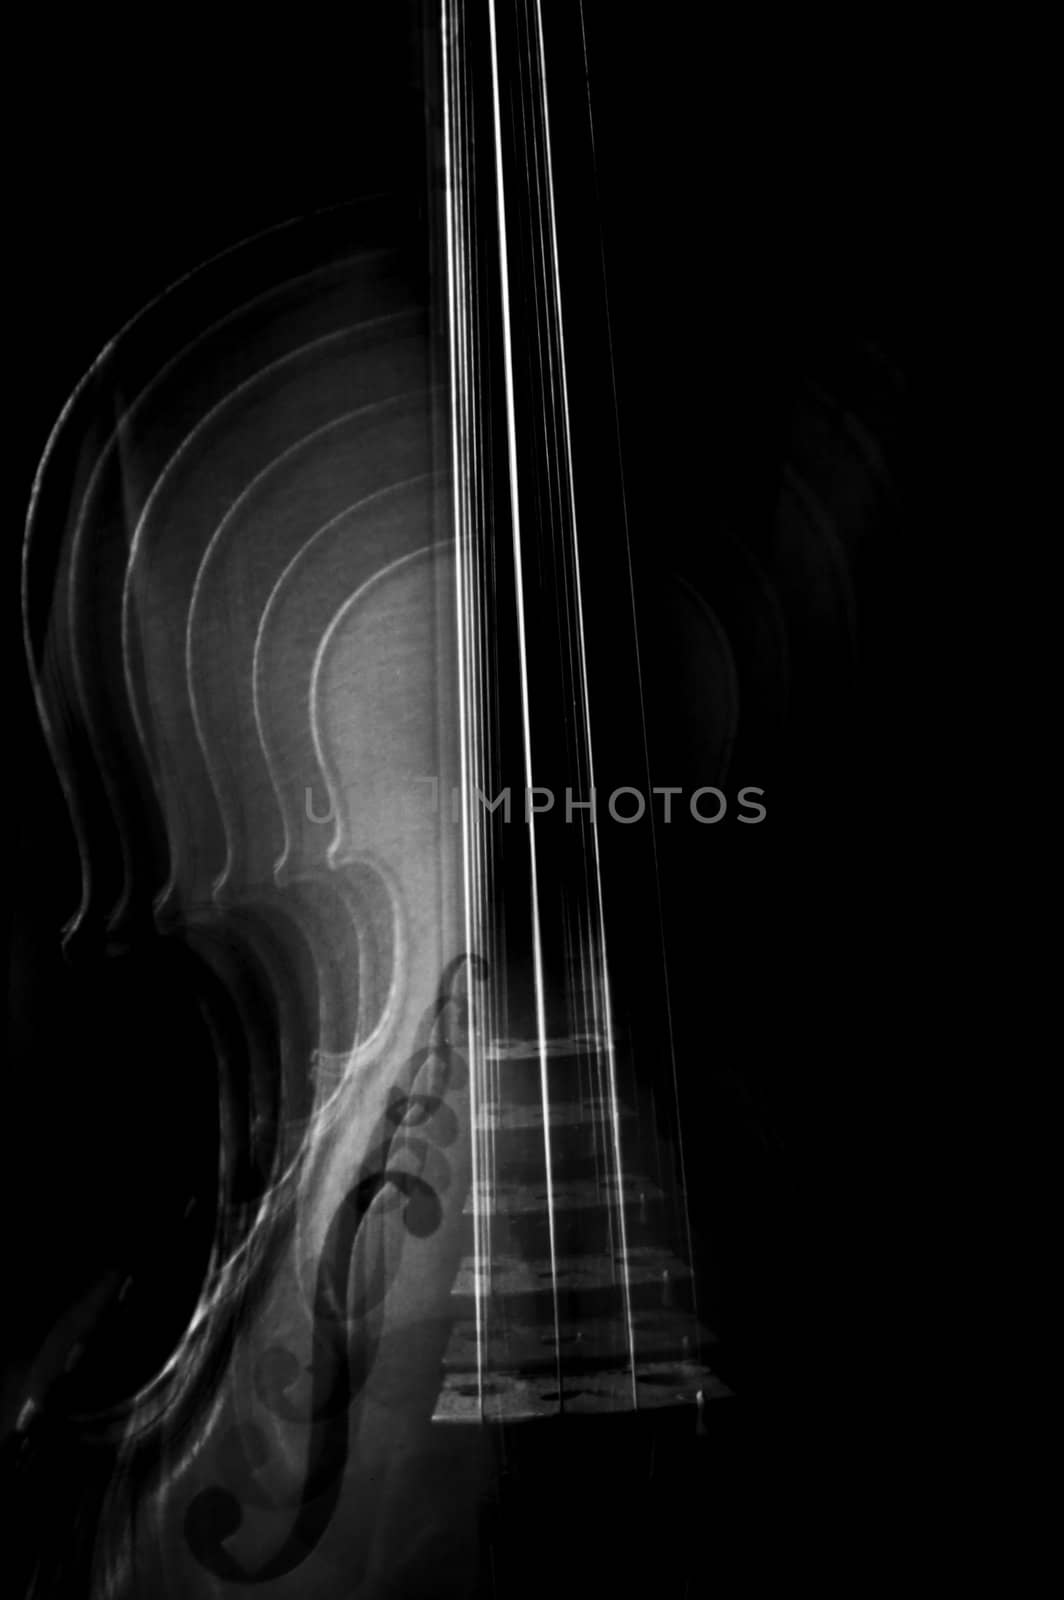 Abstract black and white violin expressing musical tones